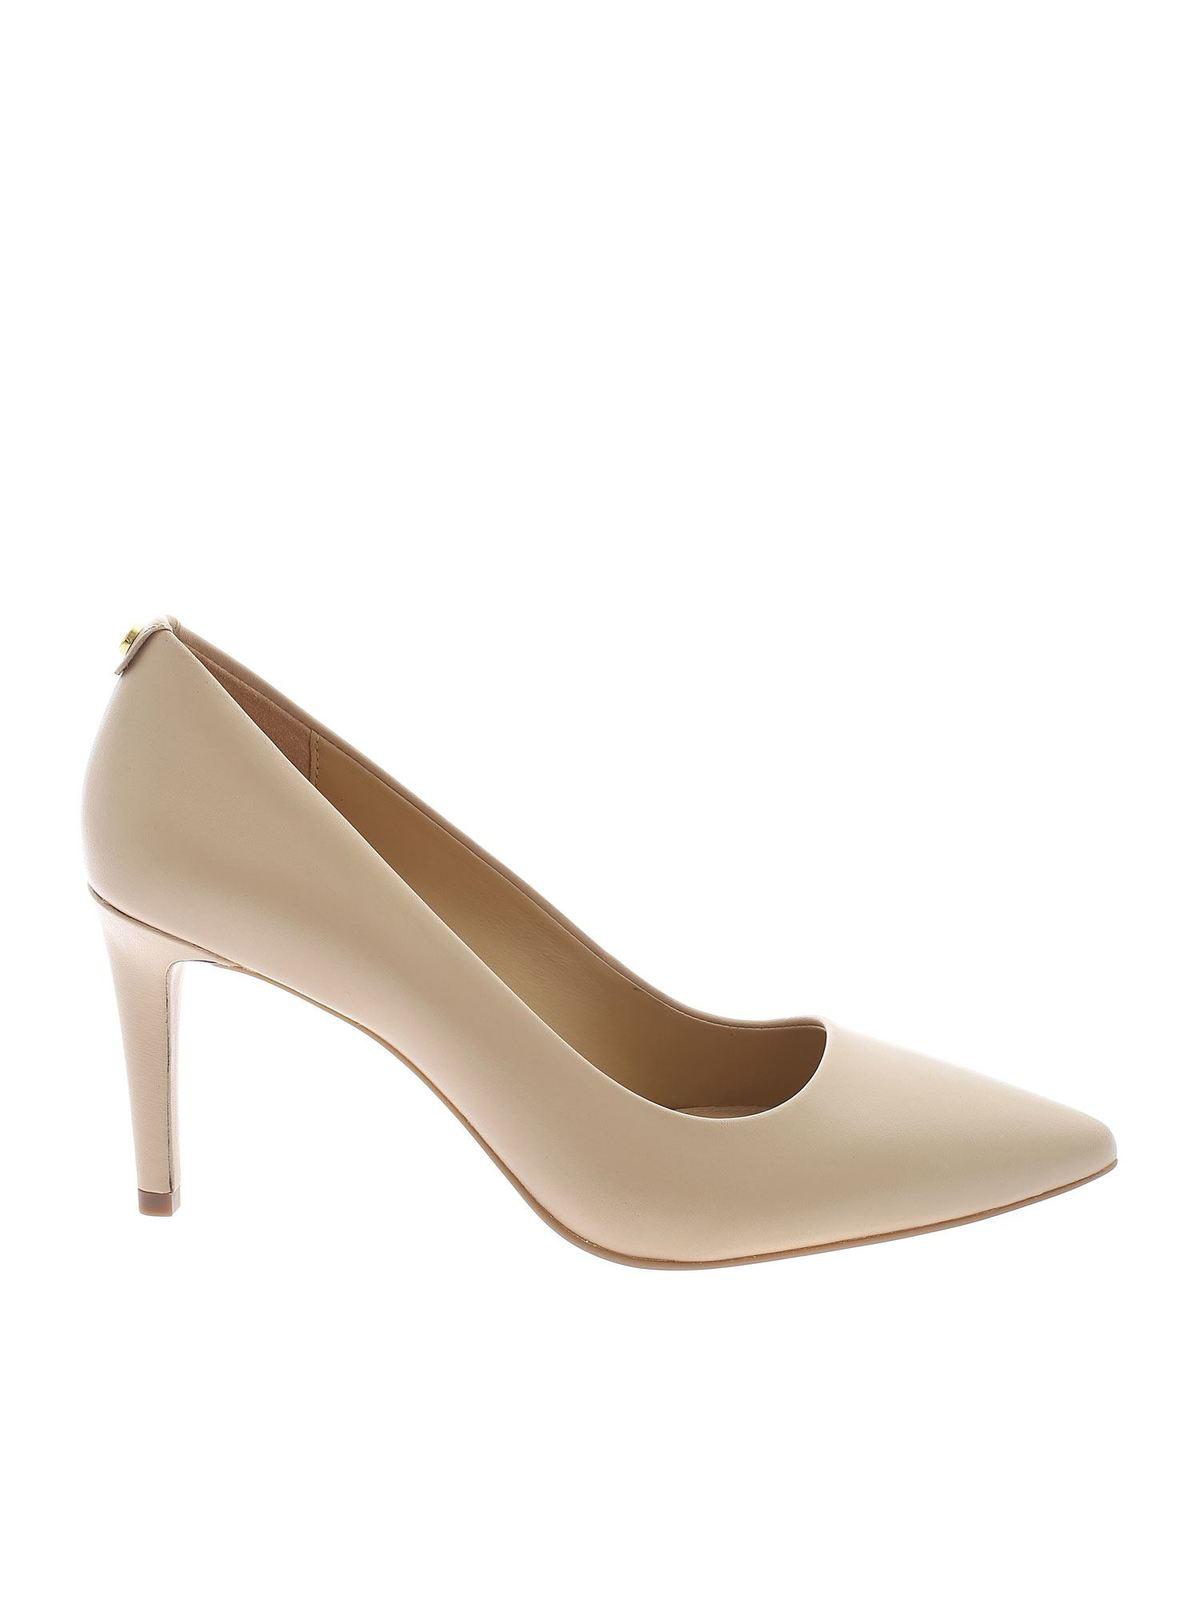 Michael Kors Dorothy Leather Pumps In Nude Color in Beige (Natural ...